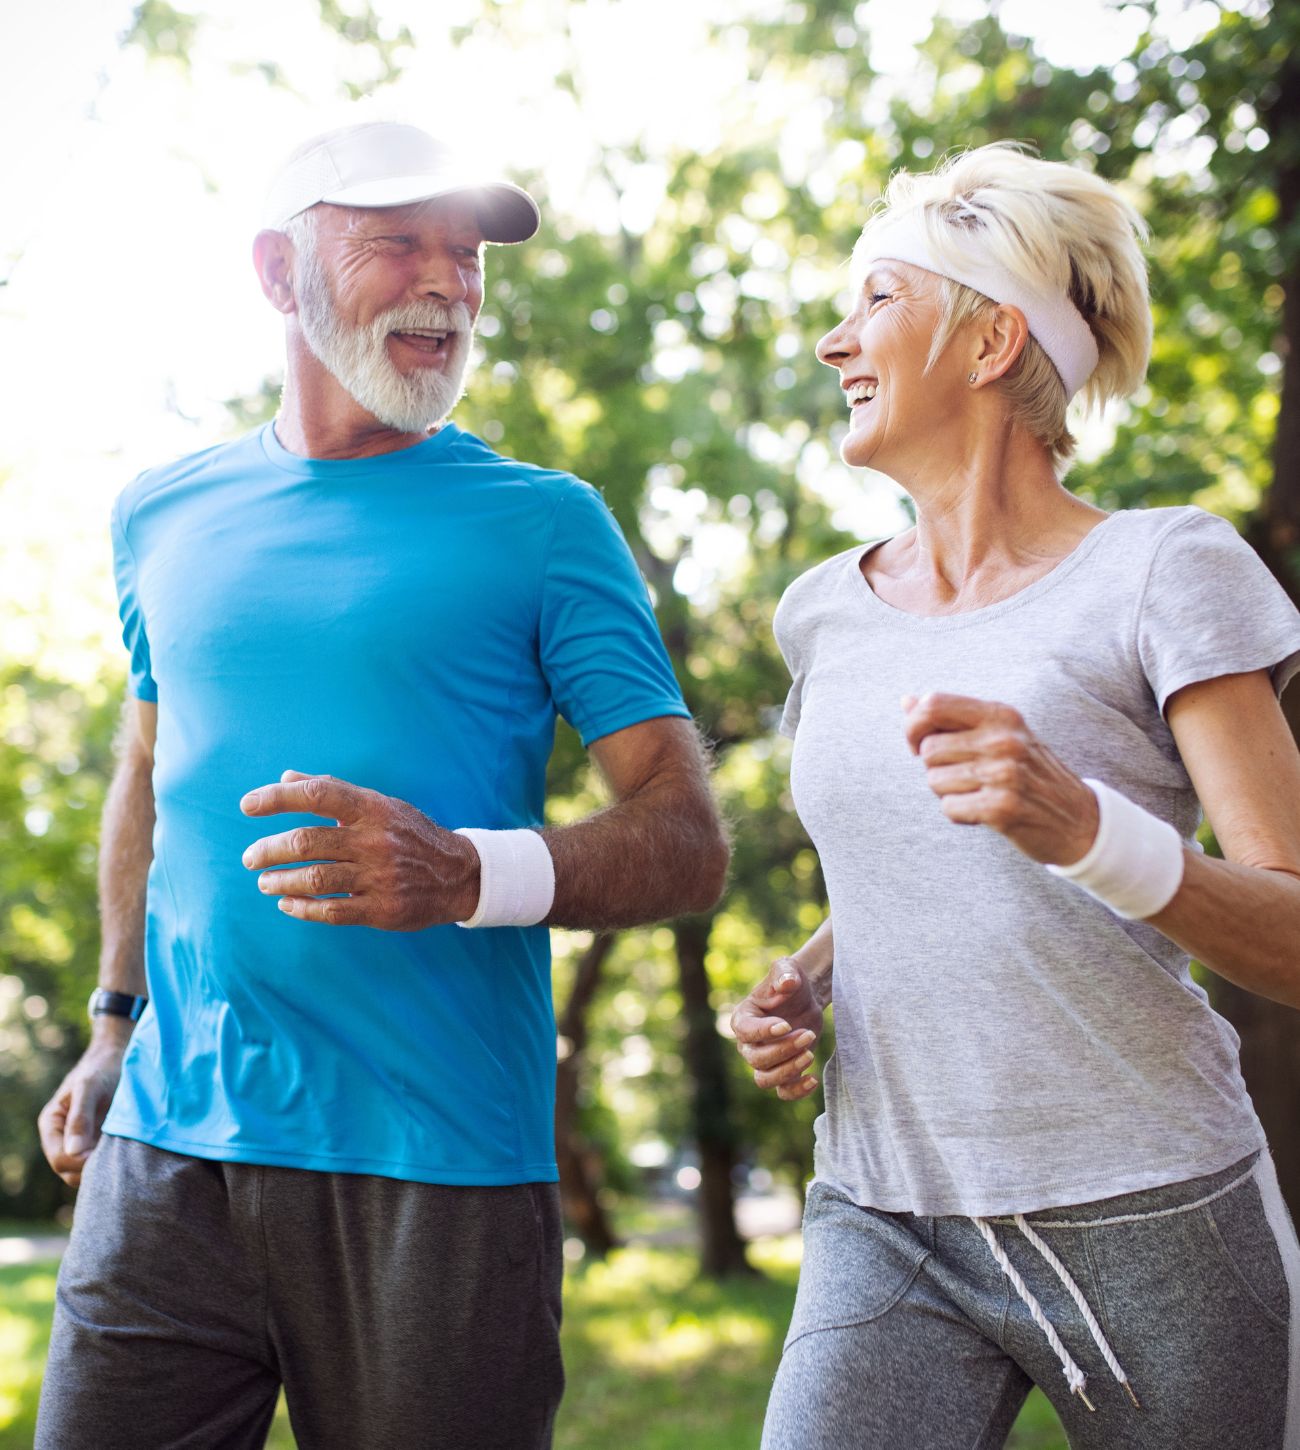 Photo of a mature man and woman flexing their muscles and joints on a morning walk or jog.